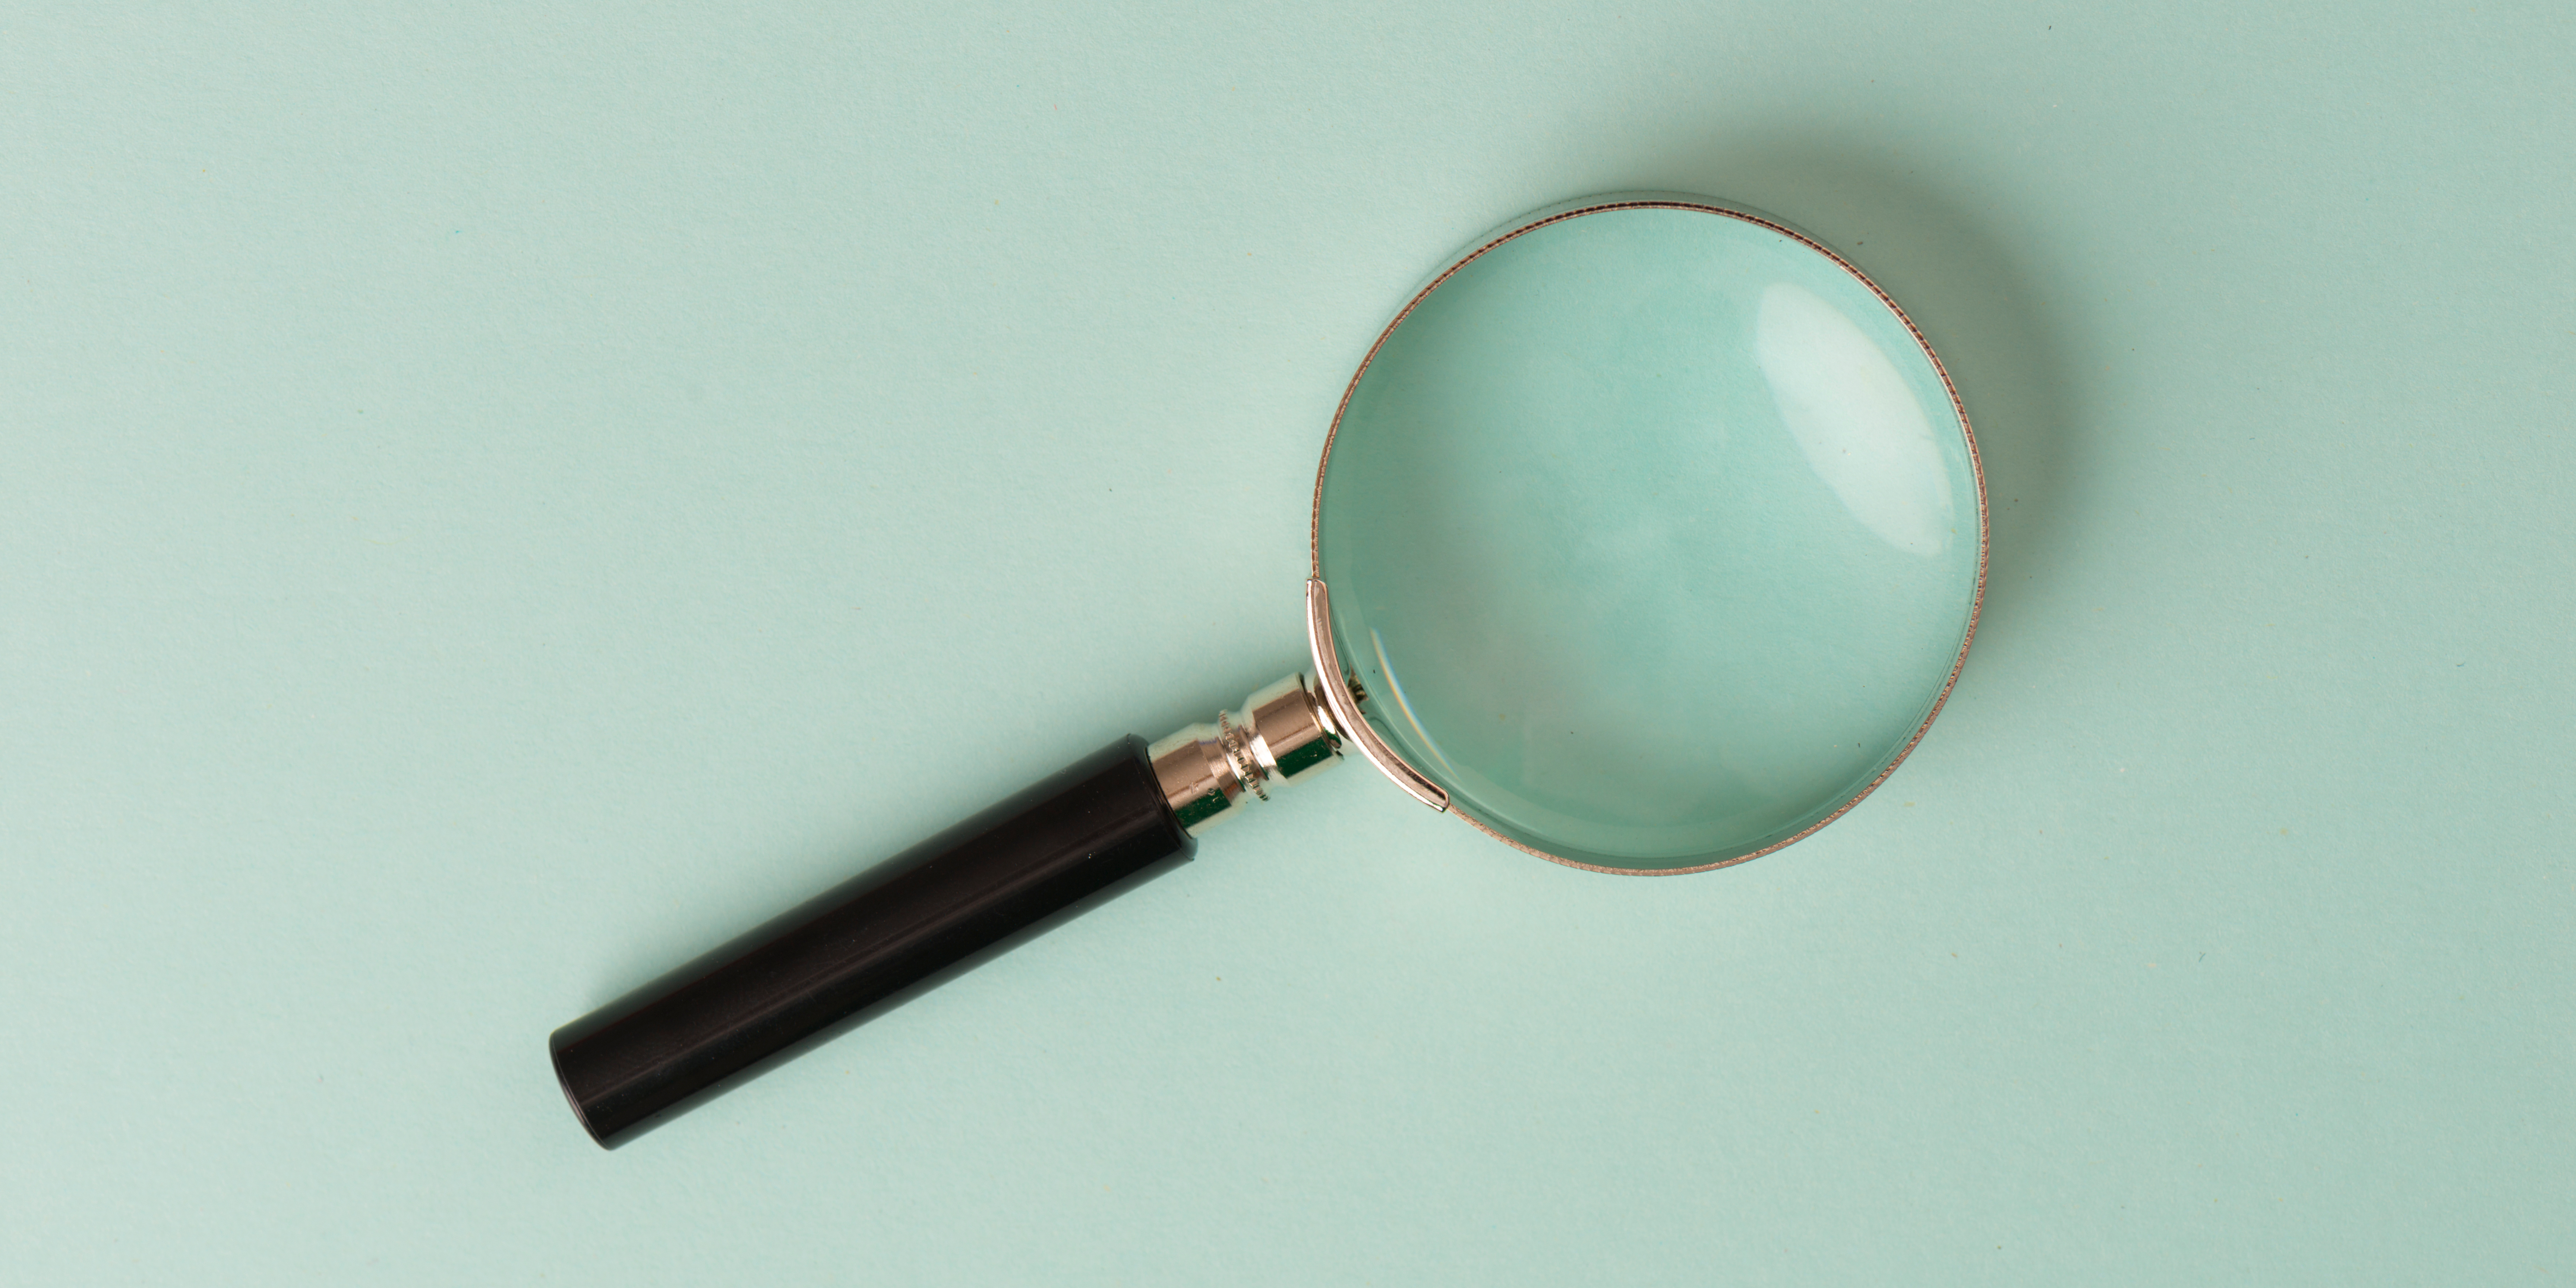 Magnifying glass against a green background.